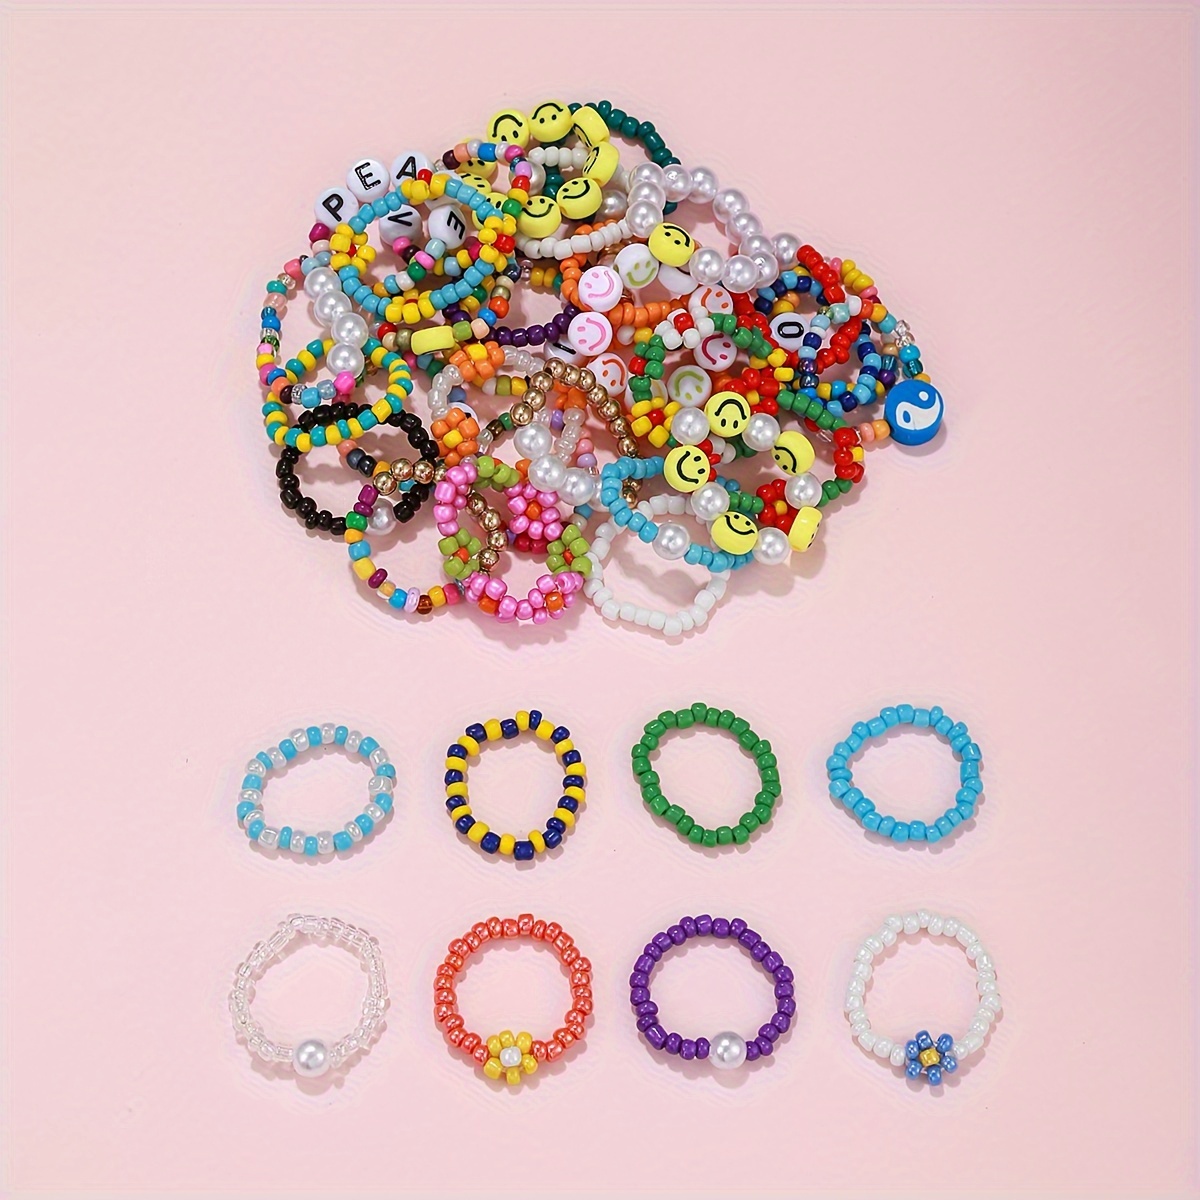 

40-piece Set Colorful Beaded Rings, Mixed Flower Toe Ring Set, Elegant Cute Bohemian Stretchy Ring Assortment, Fashionable Vintage Style Elastic Finger Ring Pack For Women